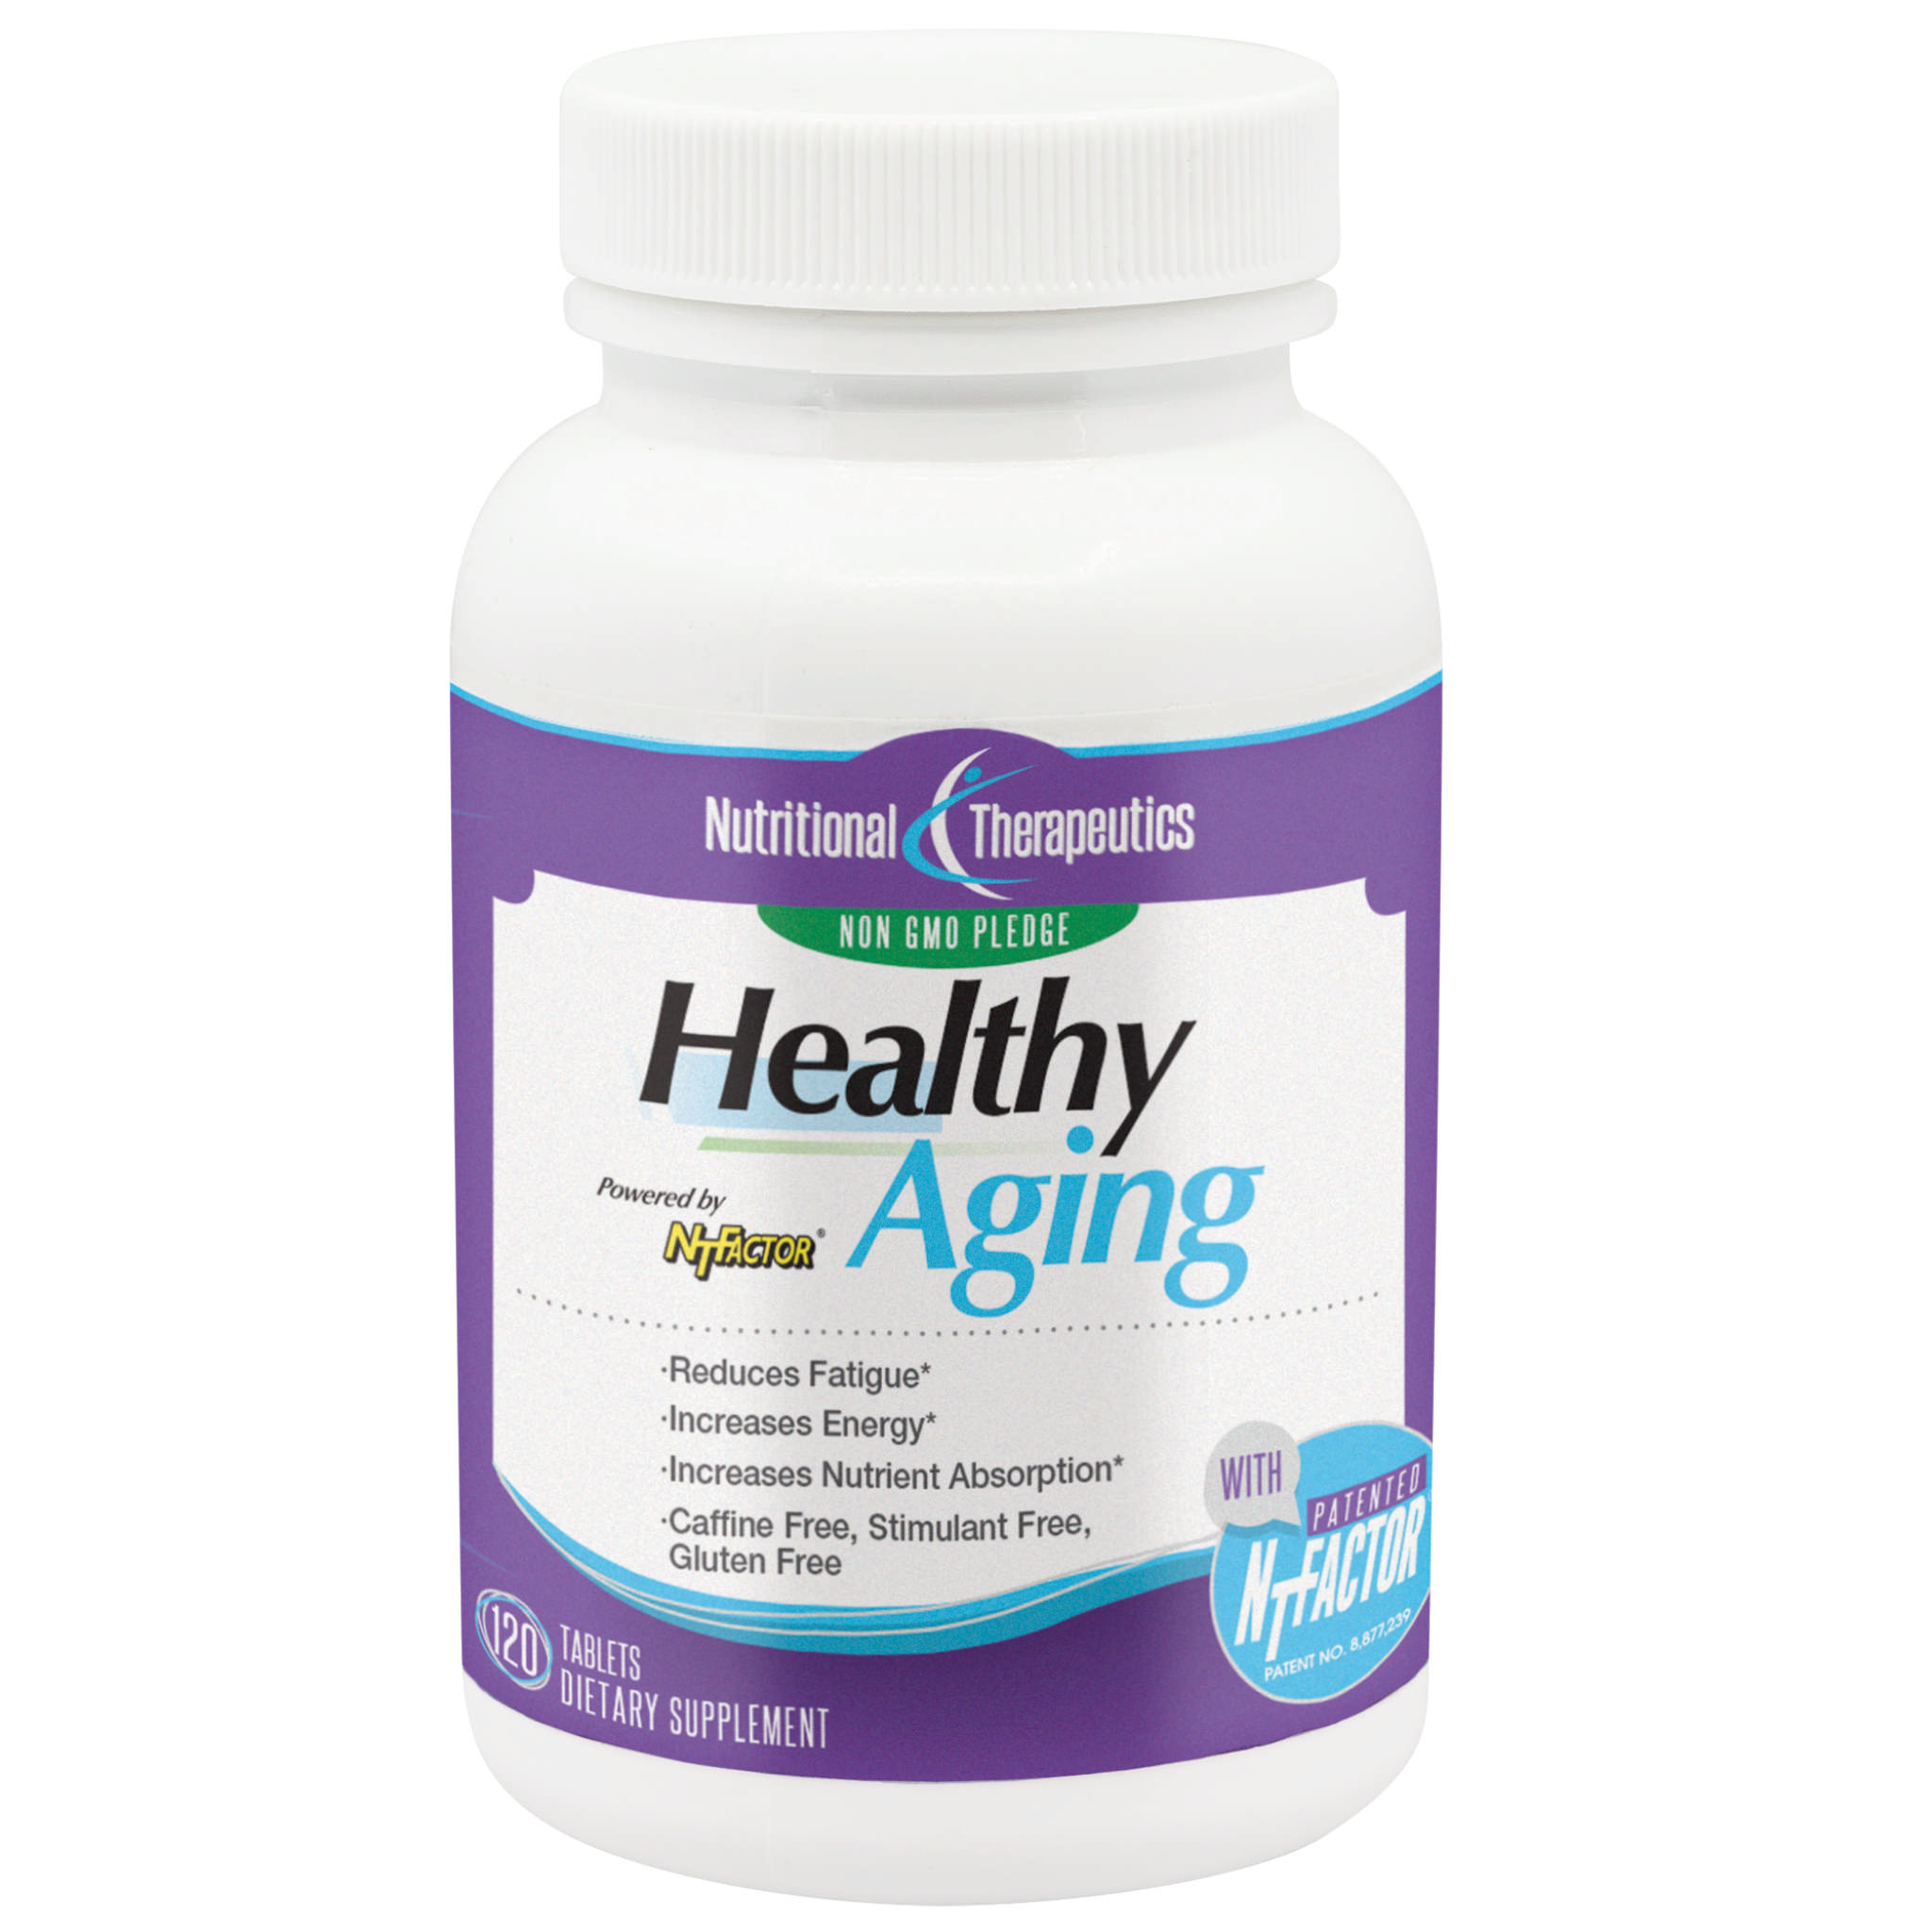 Nutritional Therapeutics - Healthy Aging Nt Factor